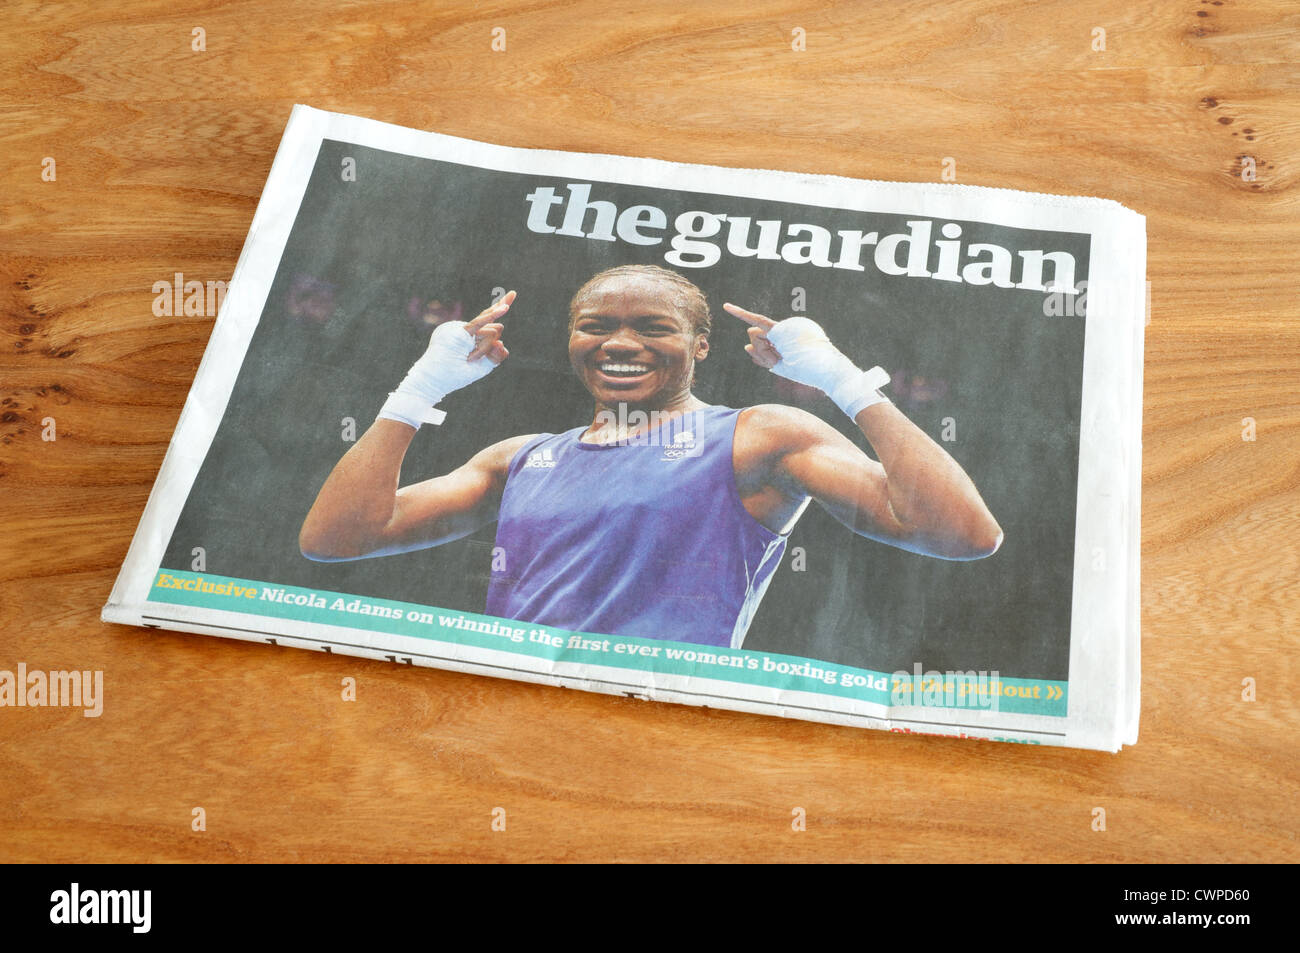 Front cover of Guardian newspaper showing gold medal boxer Nicola Adams Stock Photo